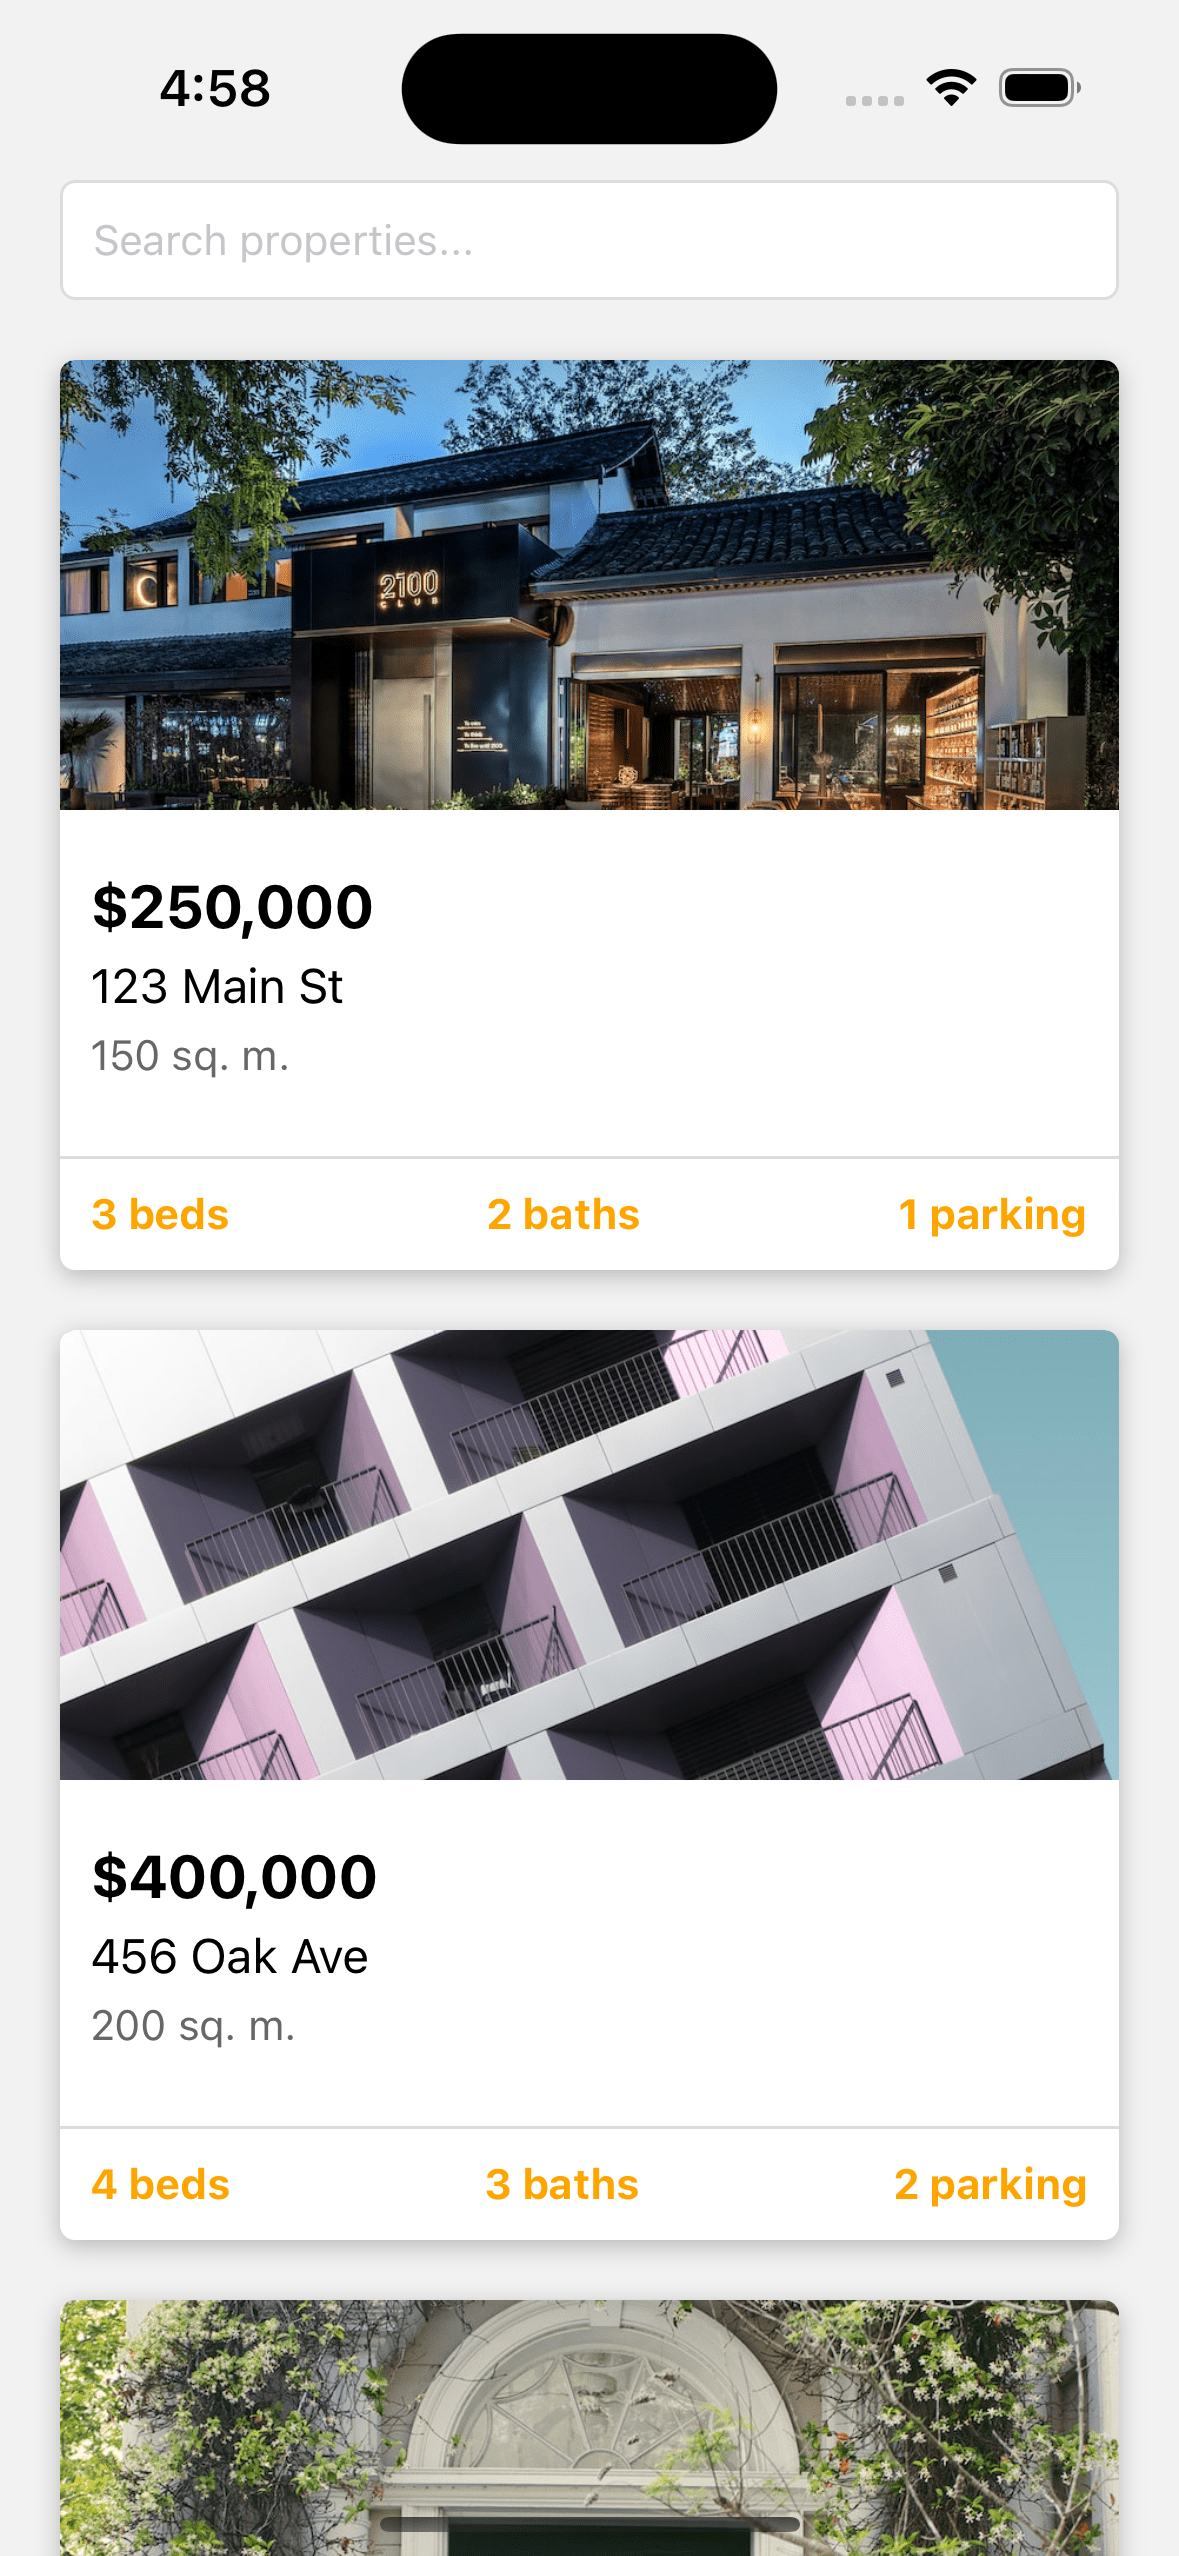 React native template. Real estate property list with image and property details